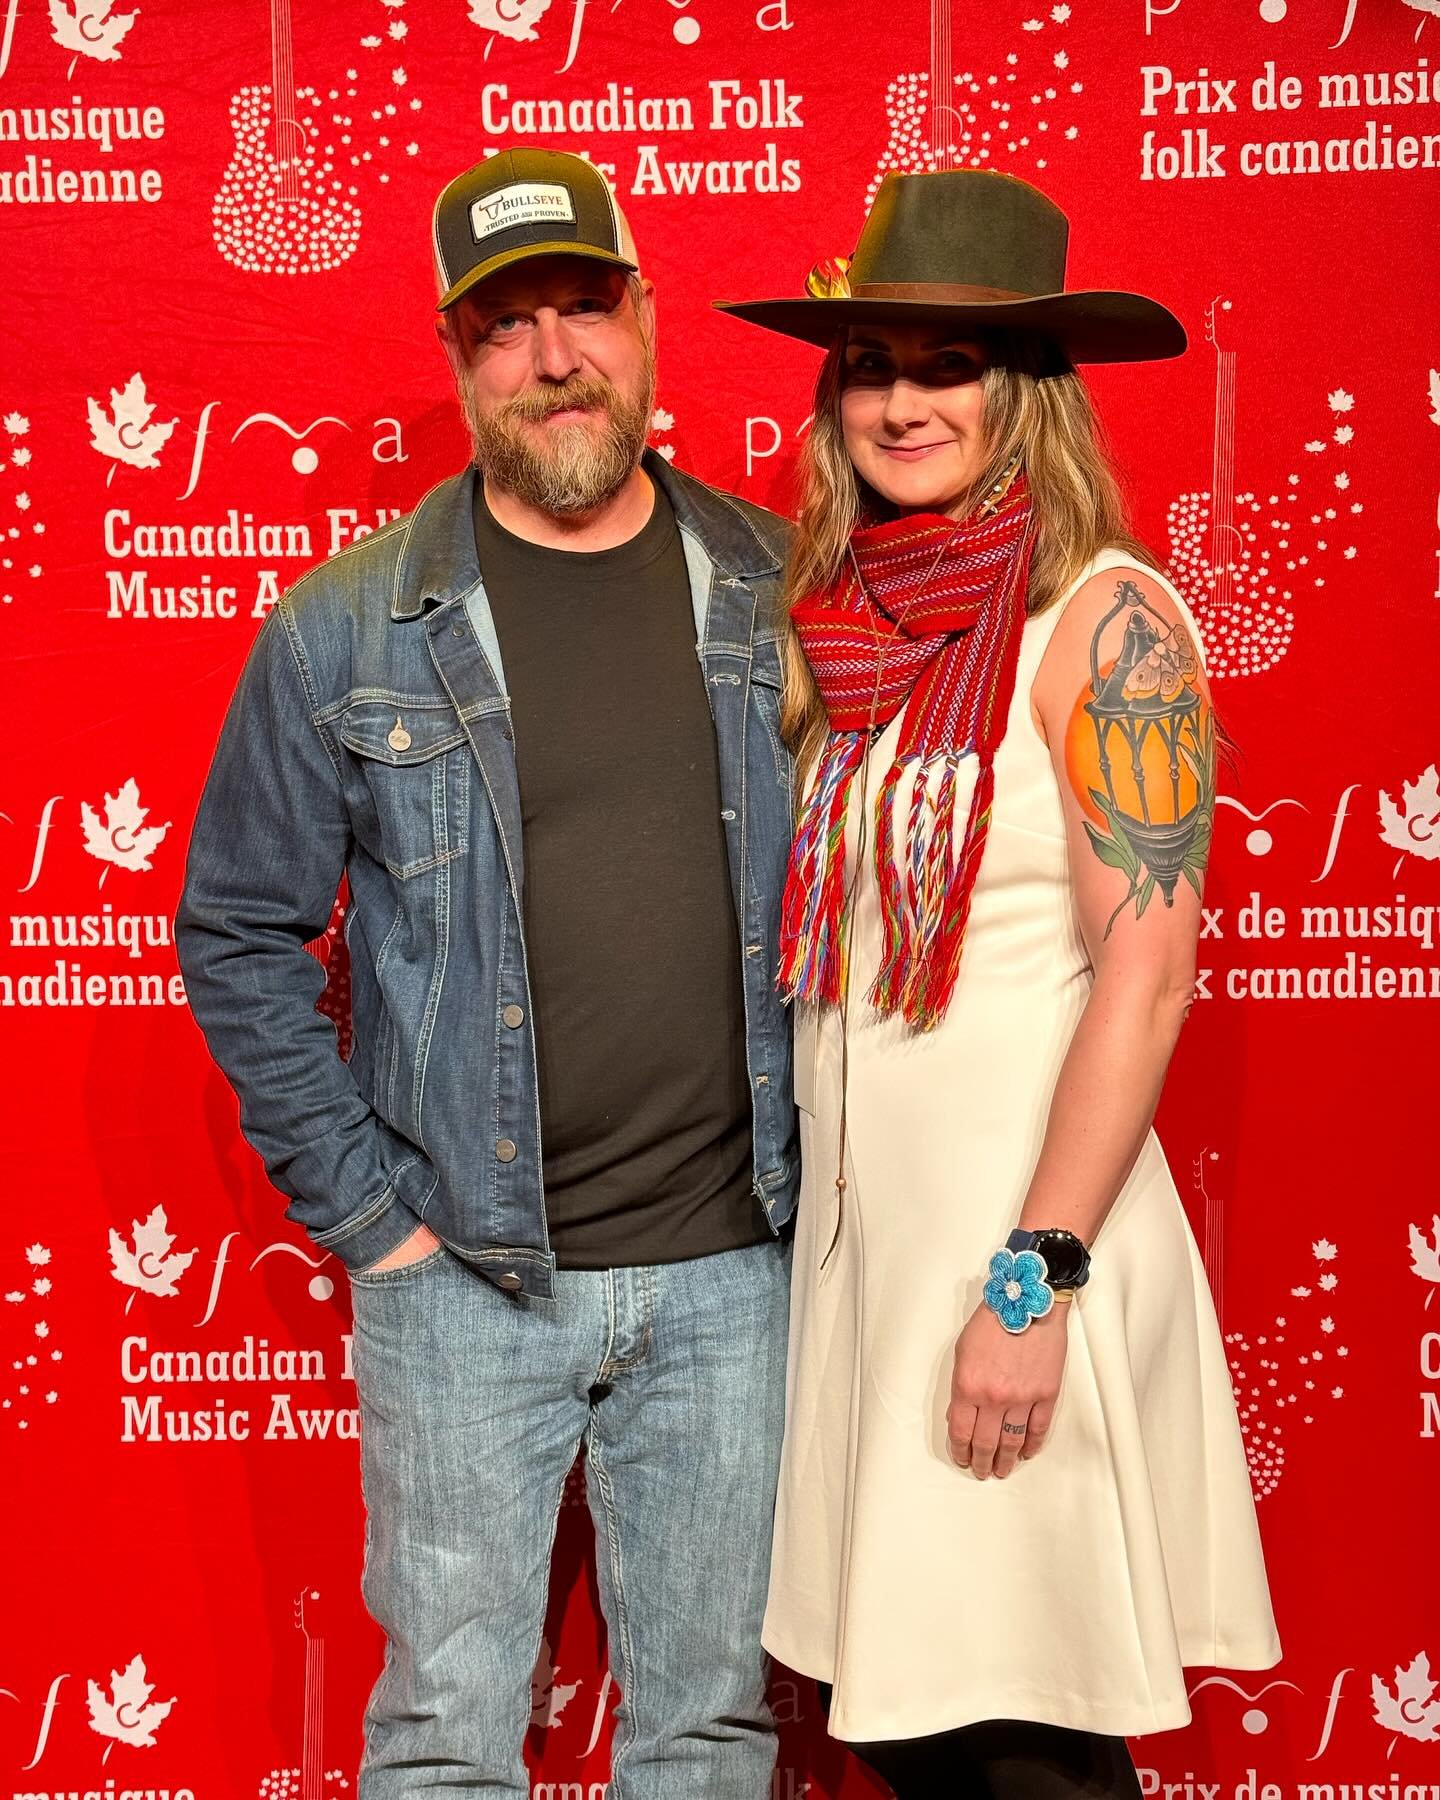 Thanks @canadianfolkmusicawards for the special weekend! Congratulations to the nominees and winners, it was an honour to be in your company. Made some new friends and memories I will treasure for a long time. Till next time!